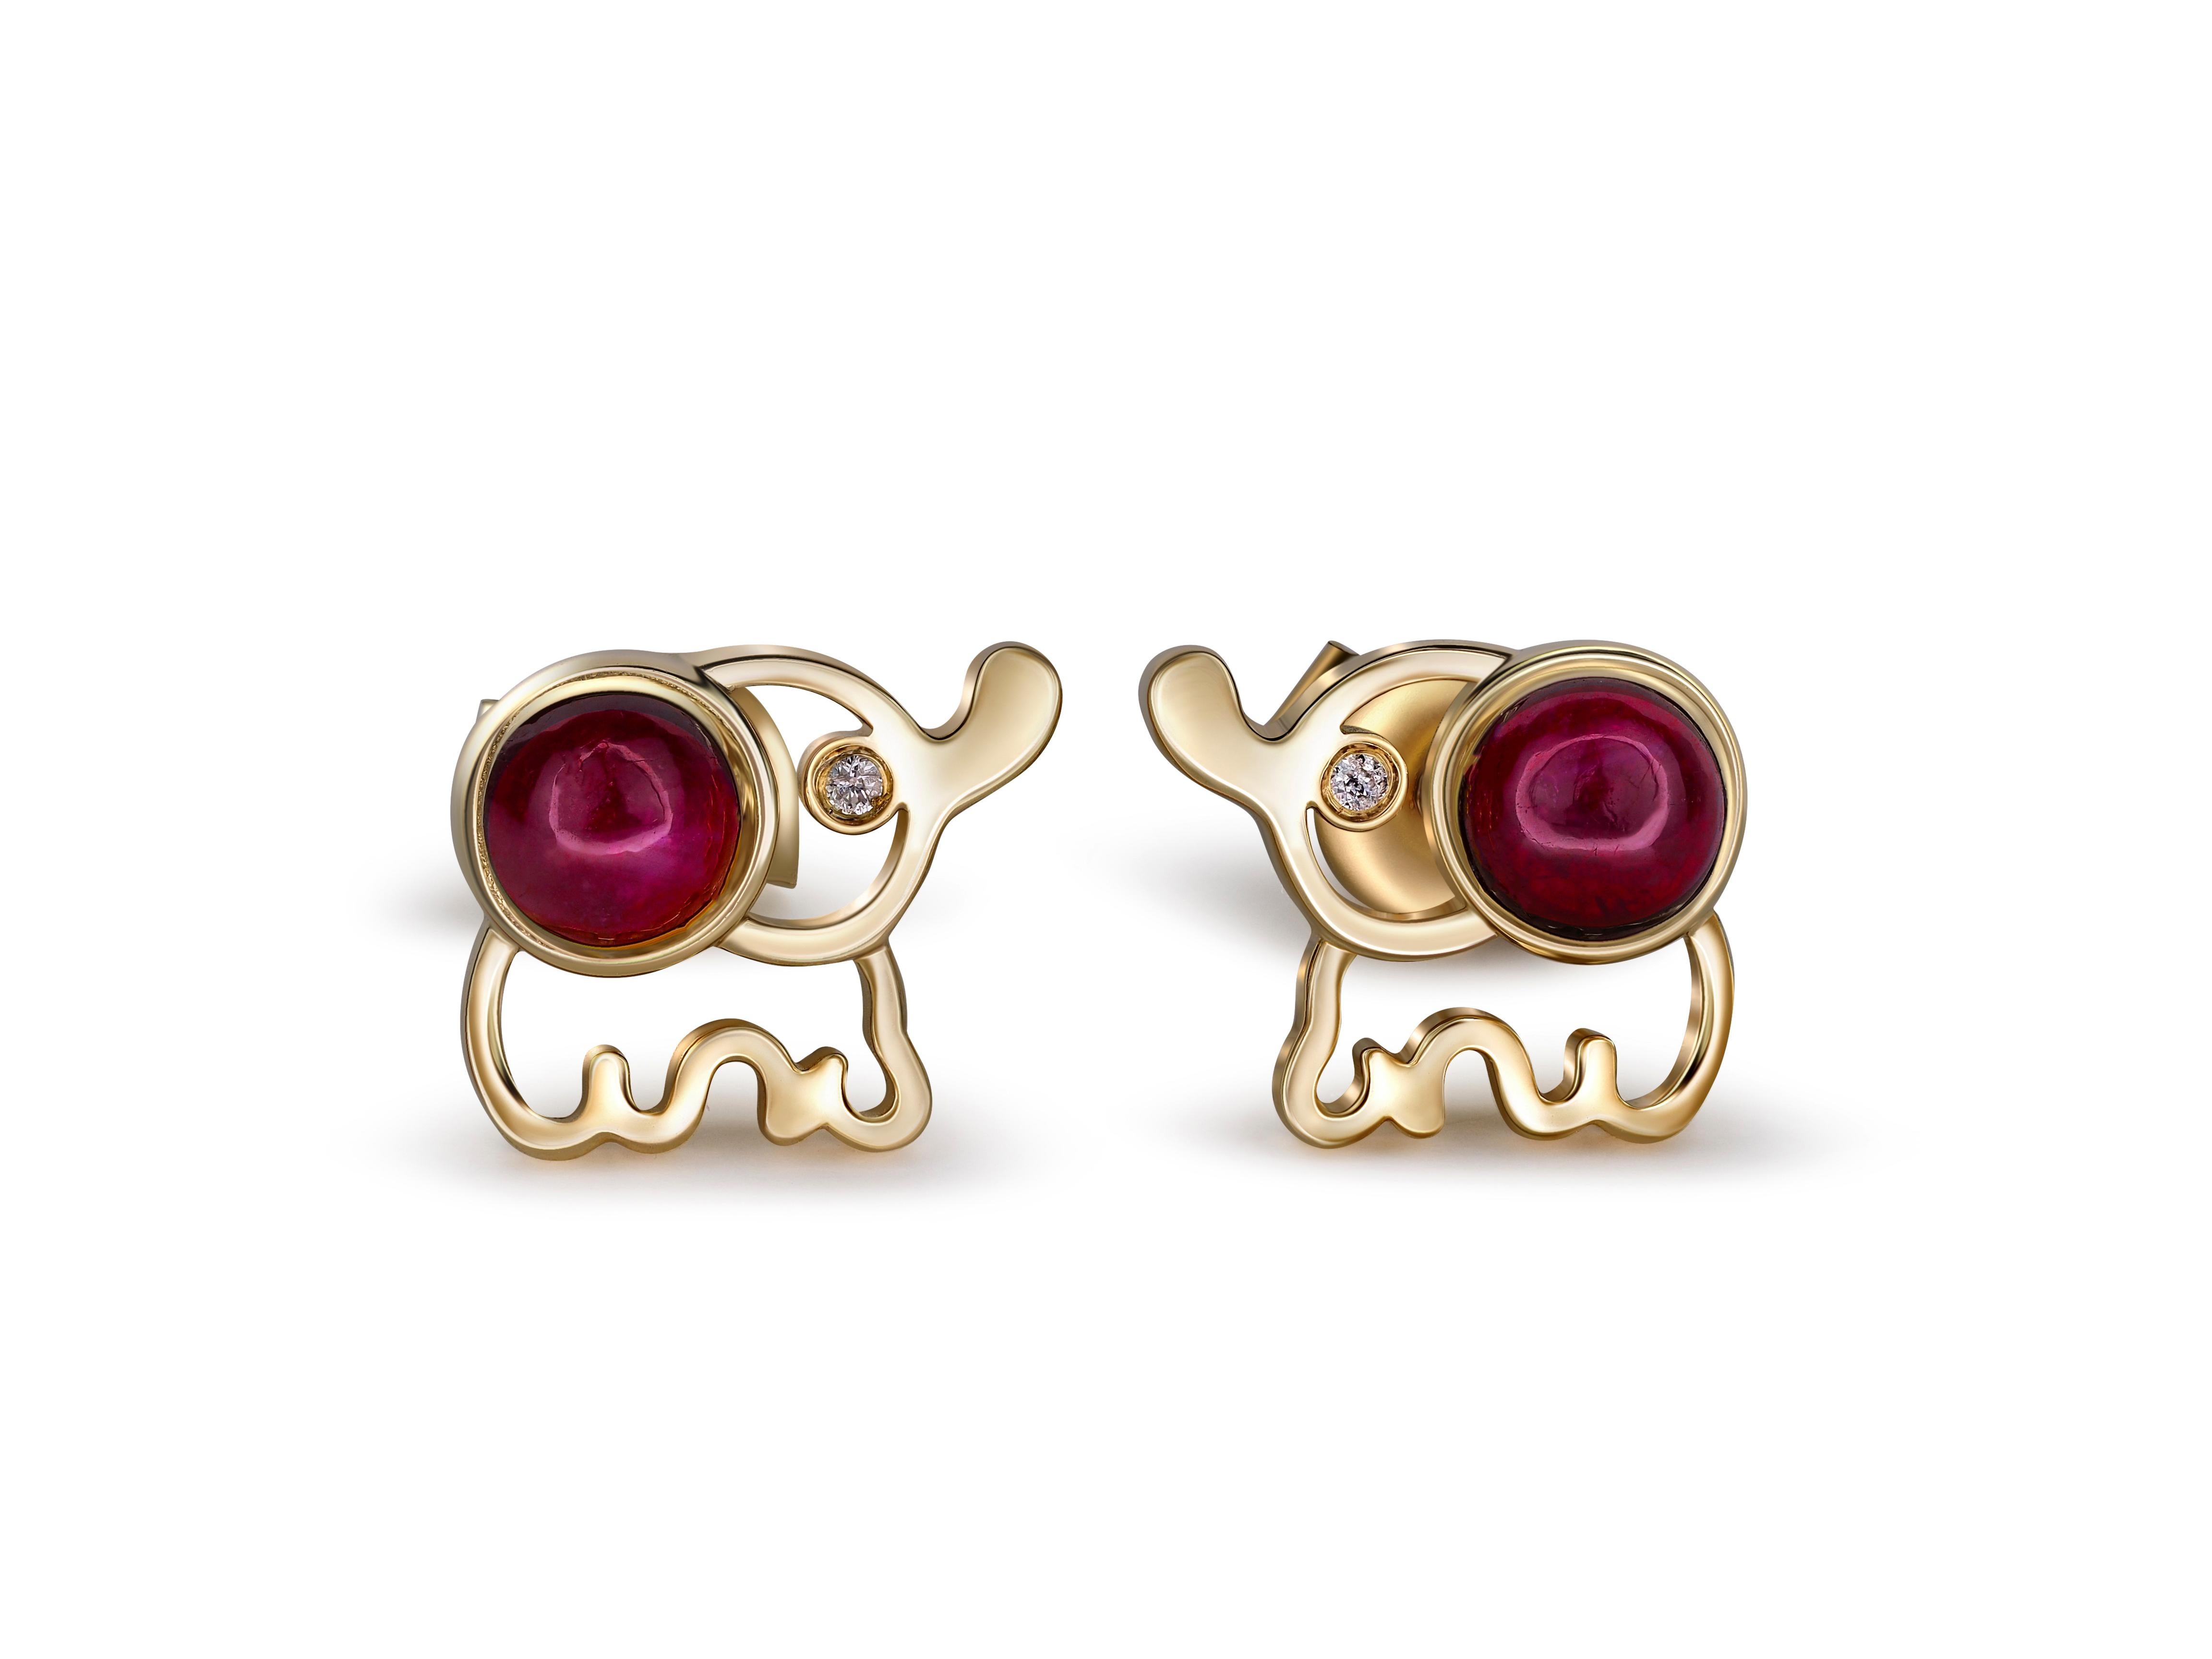 14k Gold Ruby Earrings Studs. 
Elephant earrings studs. Animal earrings. Cabochon ruby studs. Safari gold Jewelry. July birthstone earrings.

Metal type: 14kt solid gold
Weight: 2.2 g.
Size: 11 x 8 mm.

Set with natural ruby - 2 pieces, color -